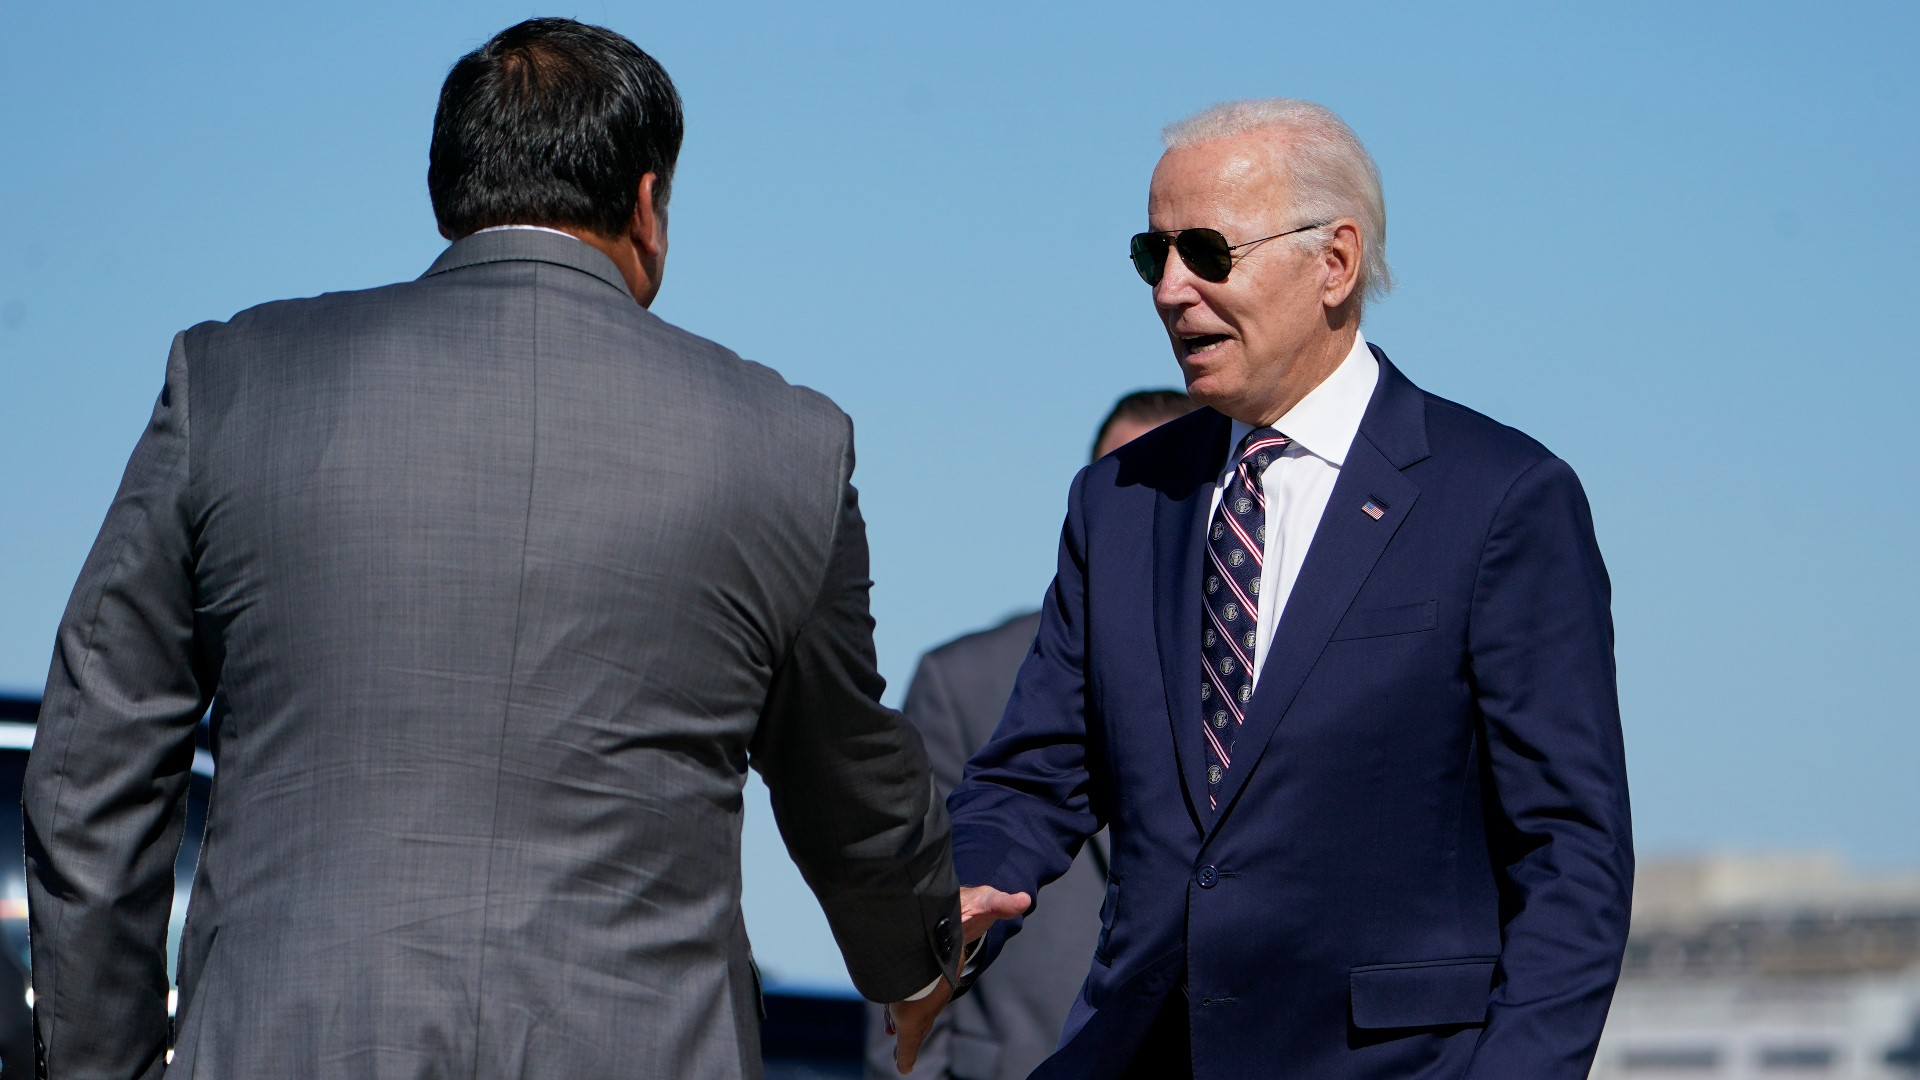 President Joe Biden is putting the spotlight on a rare bipartisan down payment boosting U.S. manufacturing as he visits the Ohio groundbreaking ceremony for Intel.